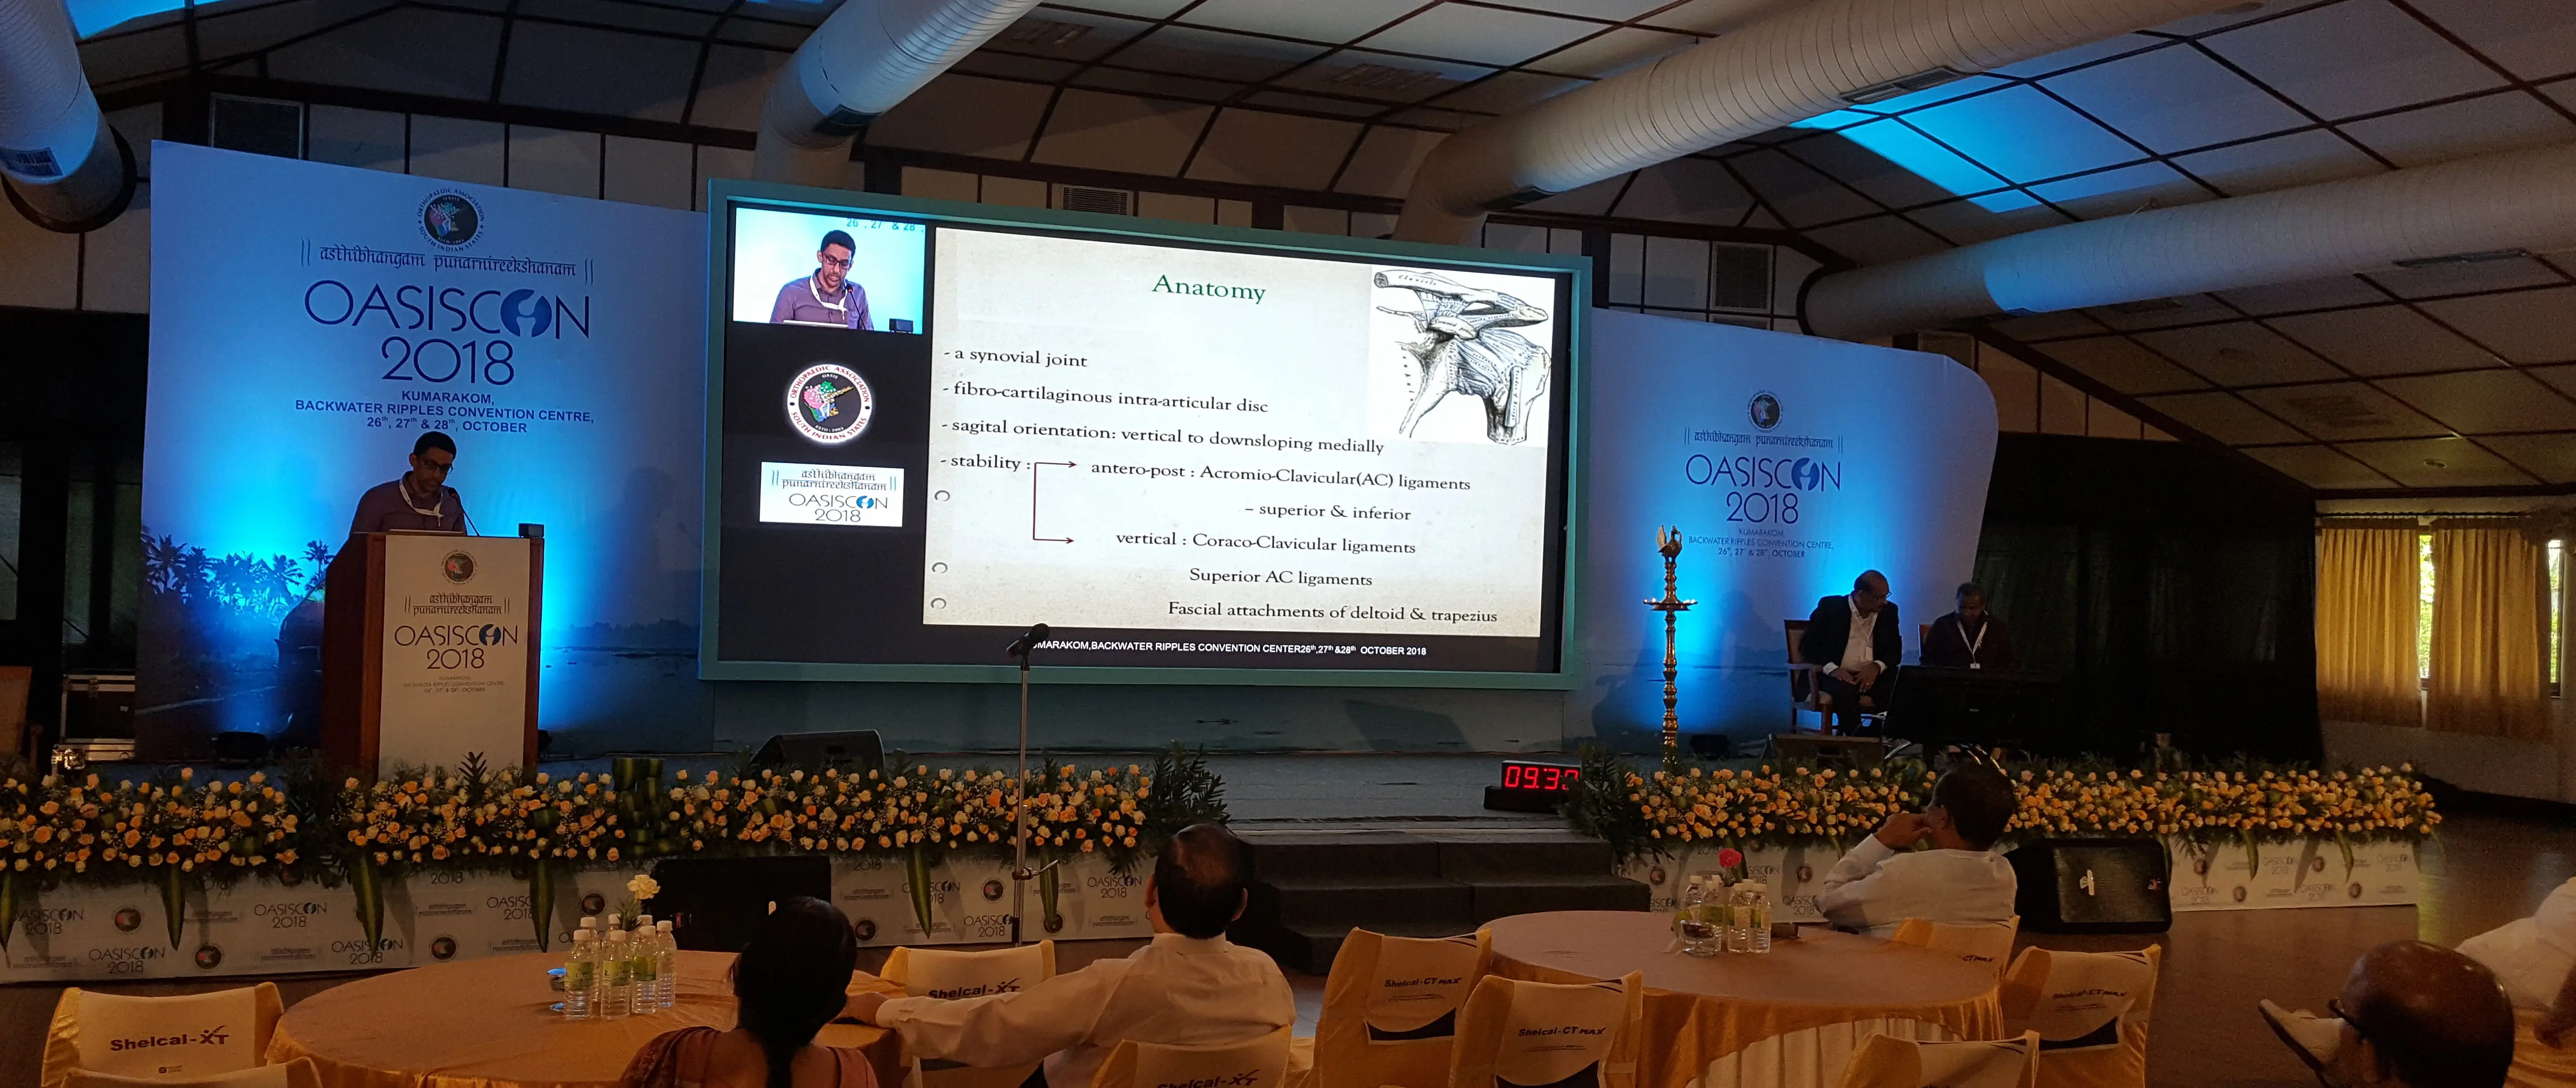 Annual Conference of the Orthopaedic Association 